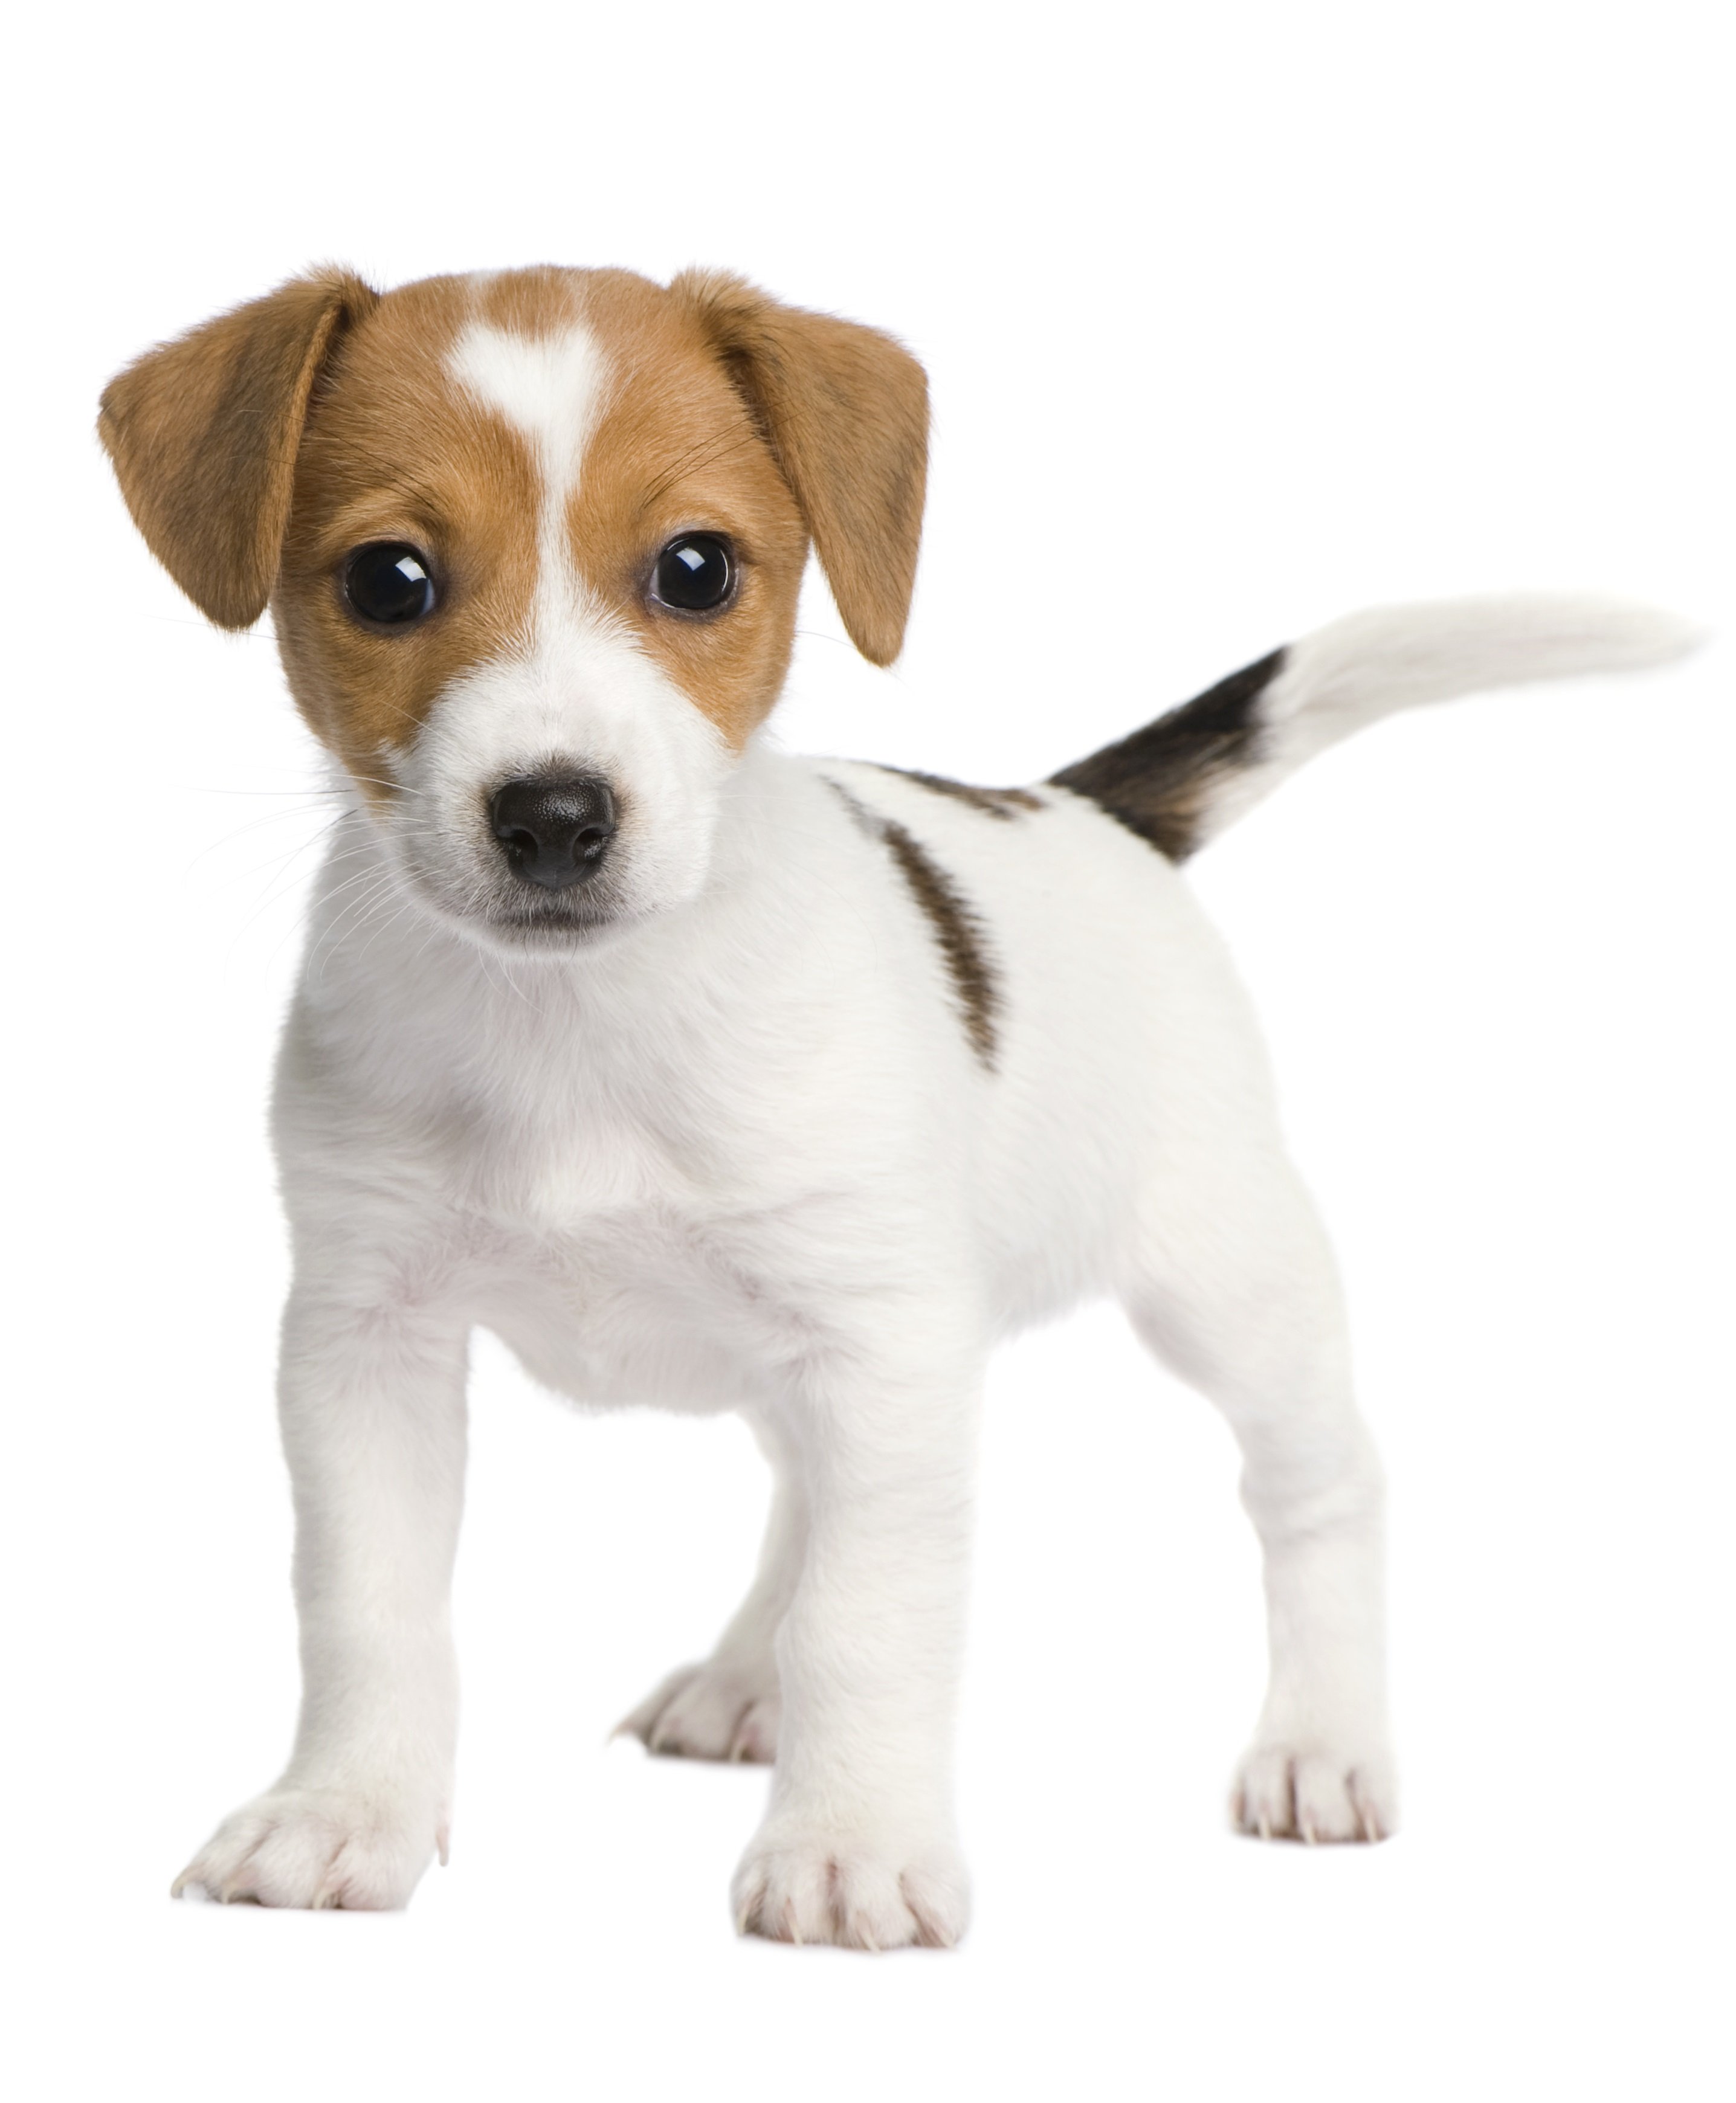 Jack Russell Terrier Puppies Breed Information Puppies For Sale